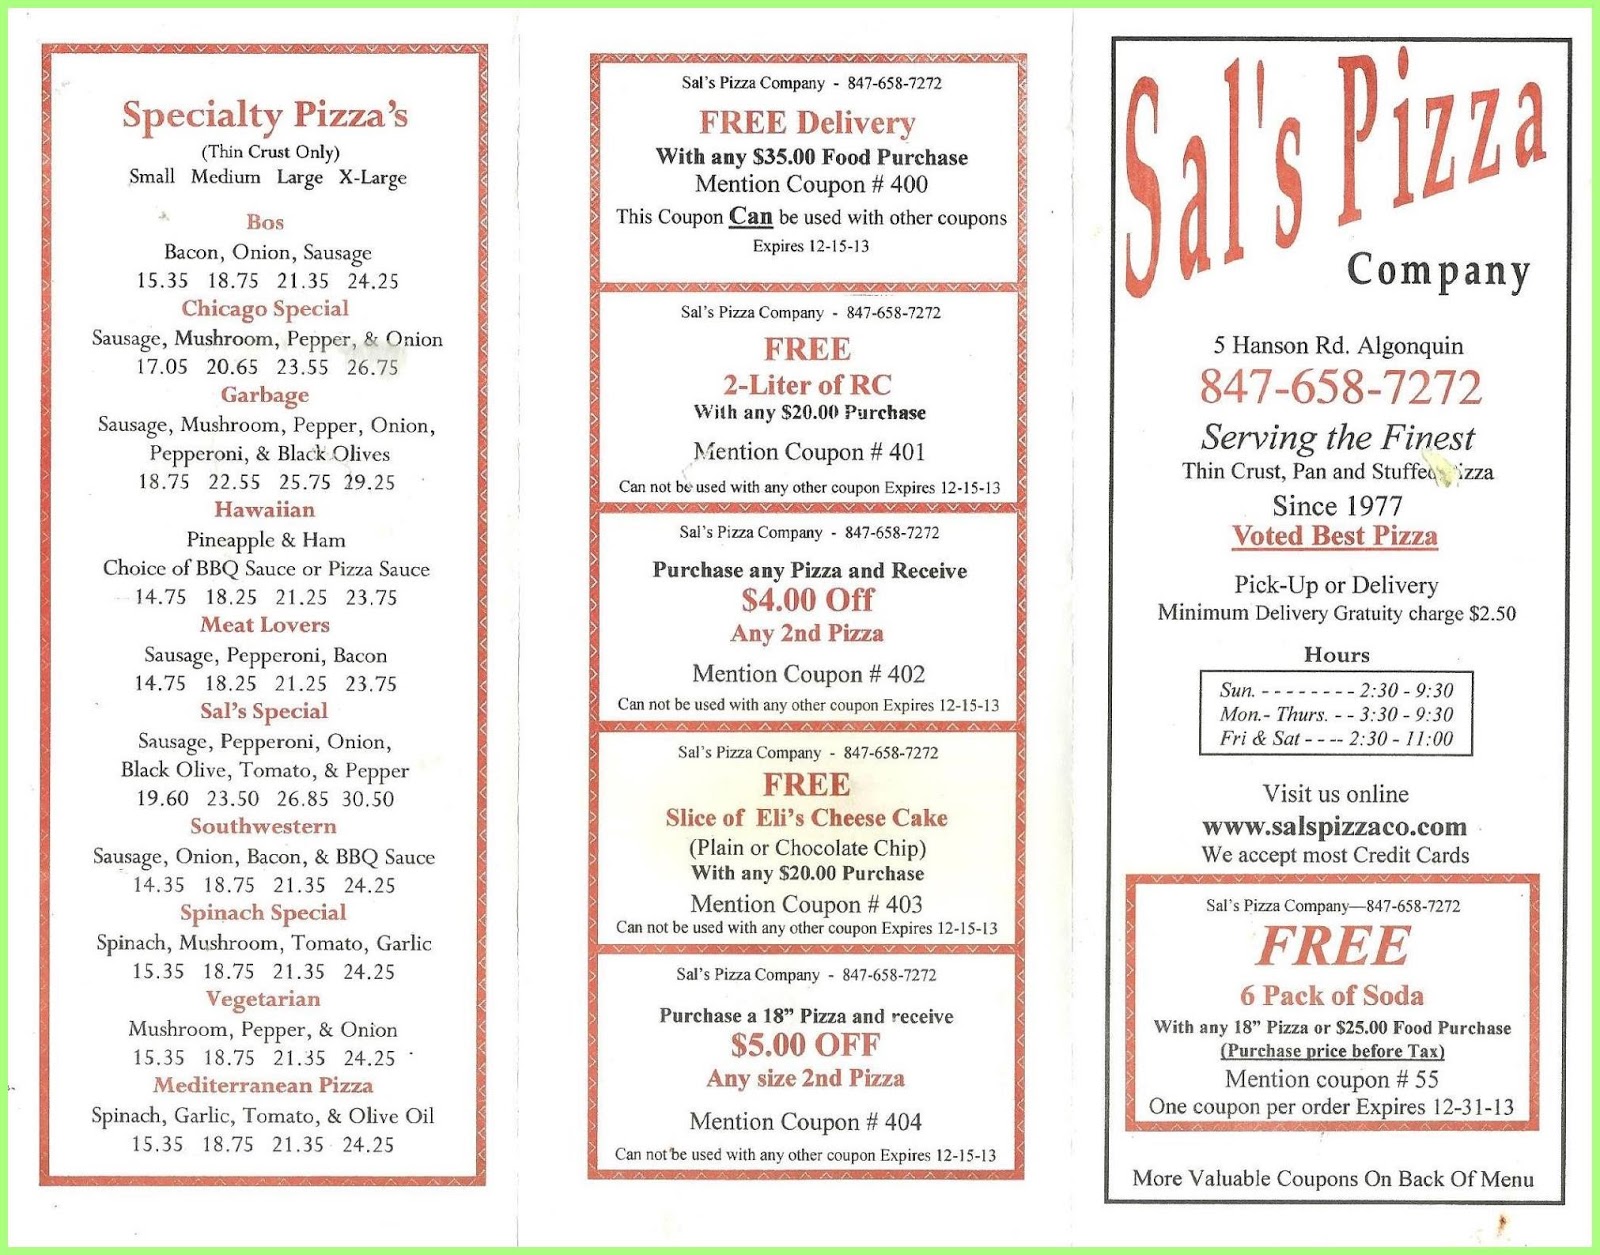 14 Kitchen Pizza Dearborn Burgers Dogs Pizza Oh My! Sal's Pizza Company Menu  Kitchen,Pizza,Dearborn